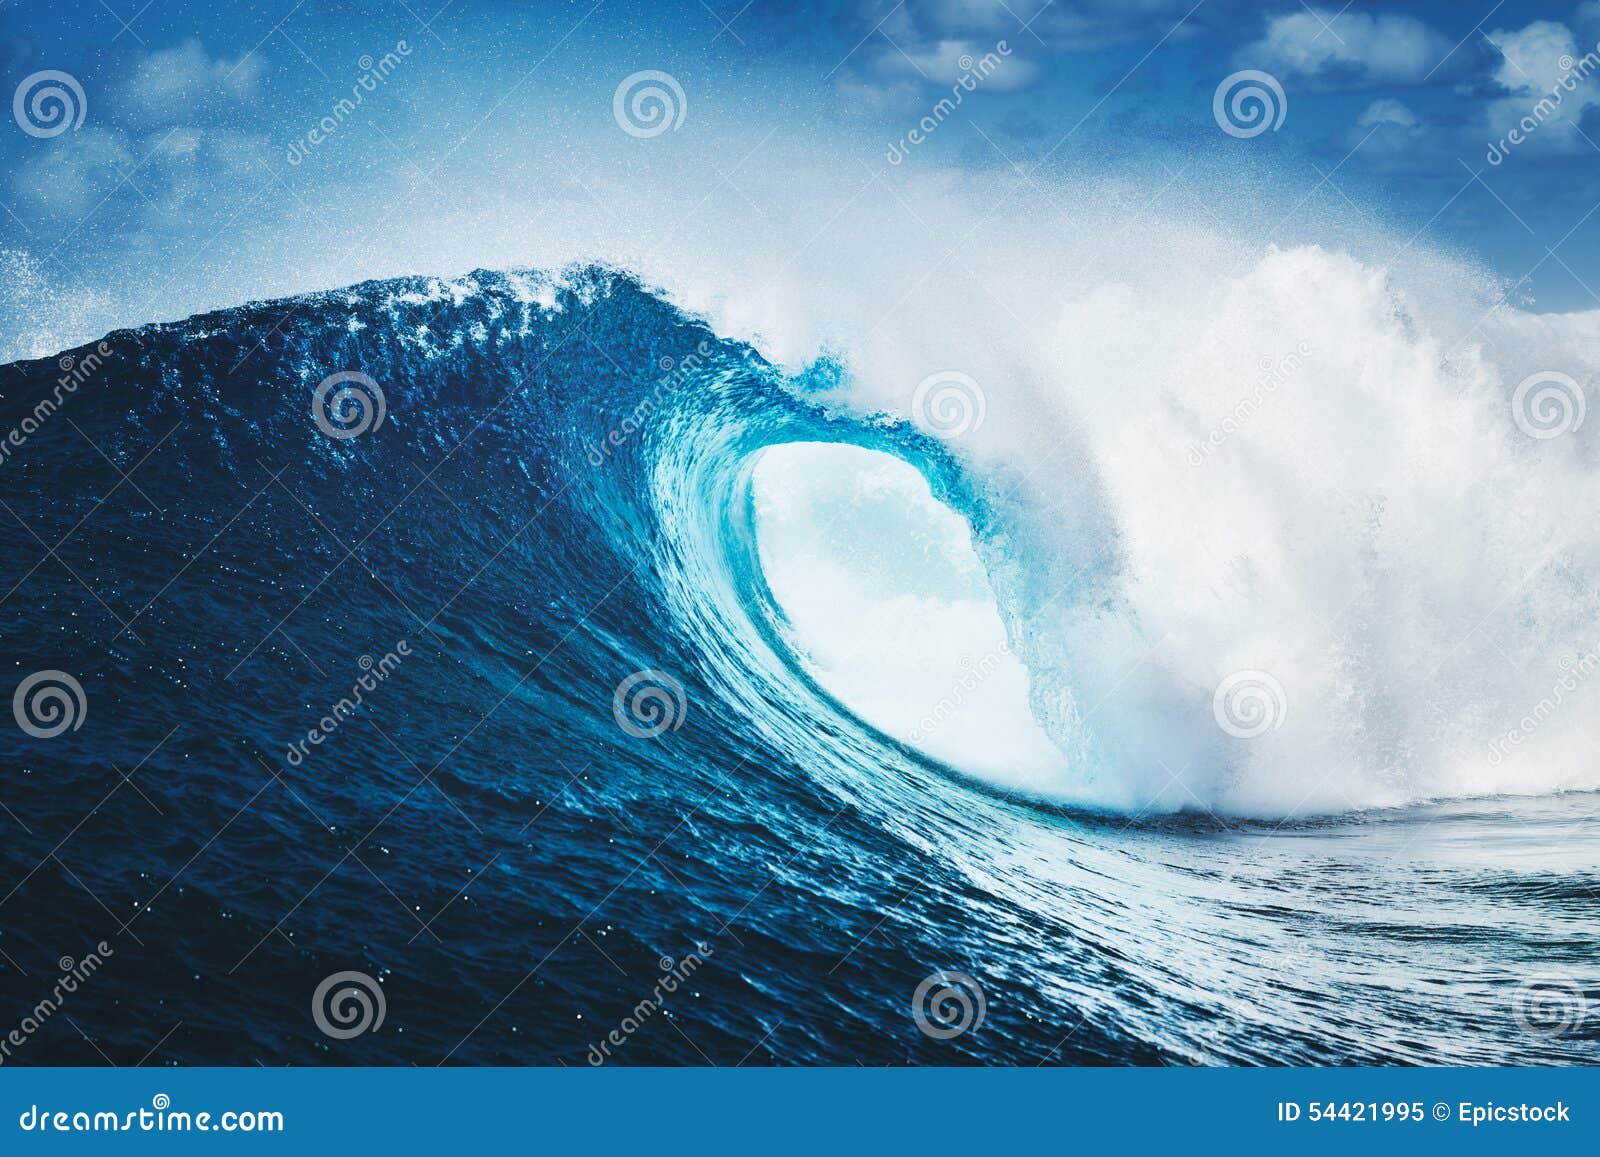 epic waves, perfect surf